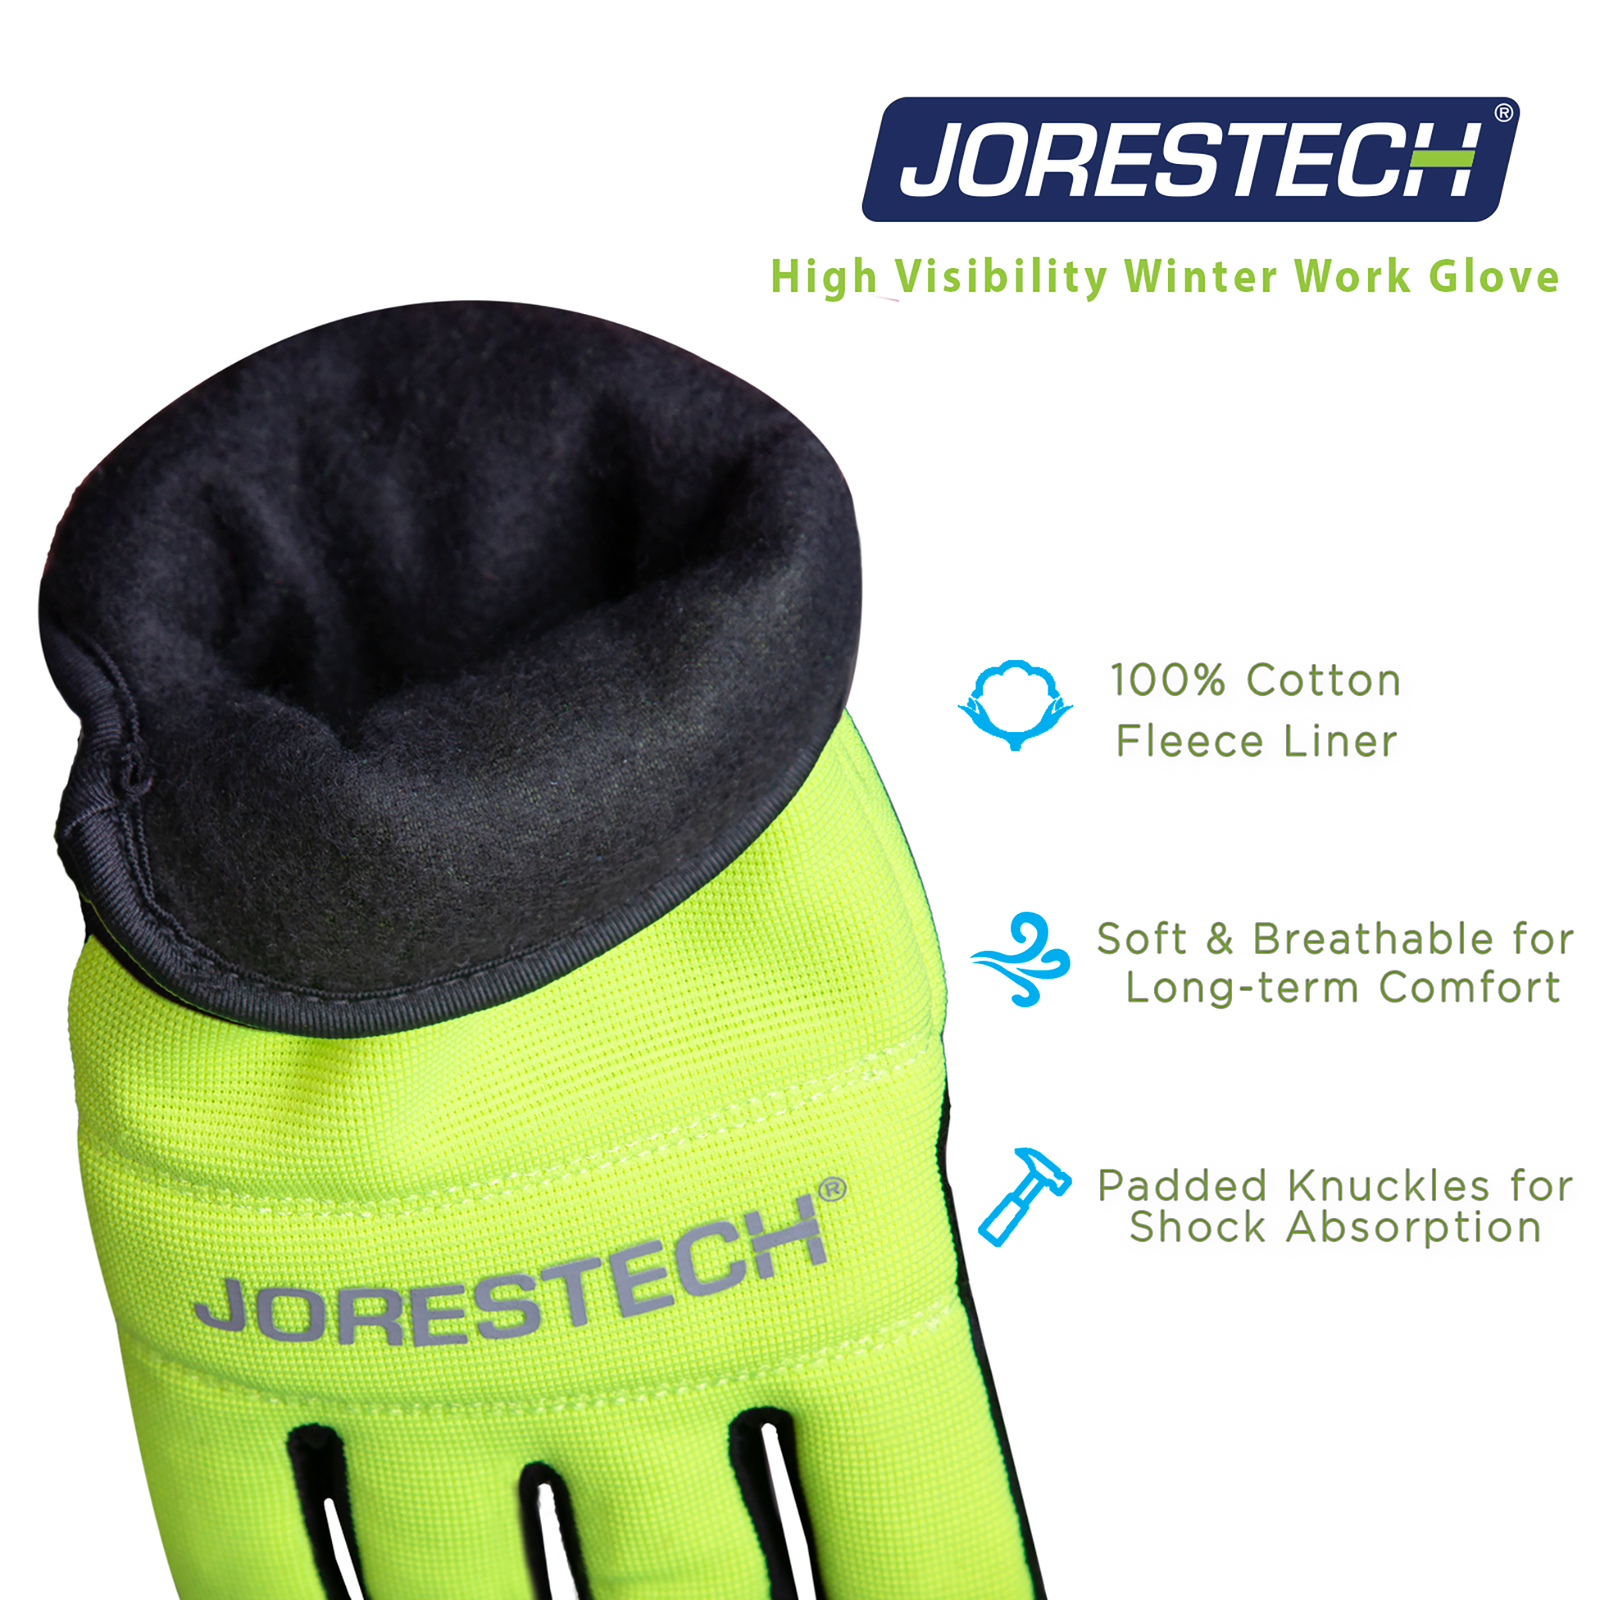 Showing the inner black fleece liner of the hi-vis touchscreen JORESTECH safety work gloves with fleece lining. Features read: high visibility winter work glove. 100% cotton fleece liner, Soft breathable for long term comfort, padded knuckles for shock absorption